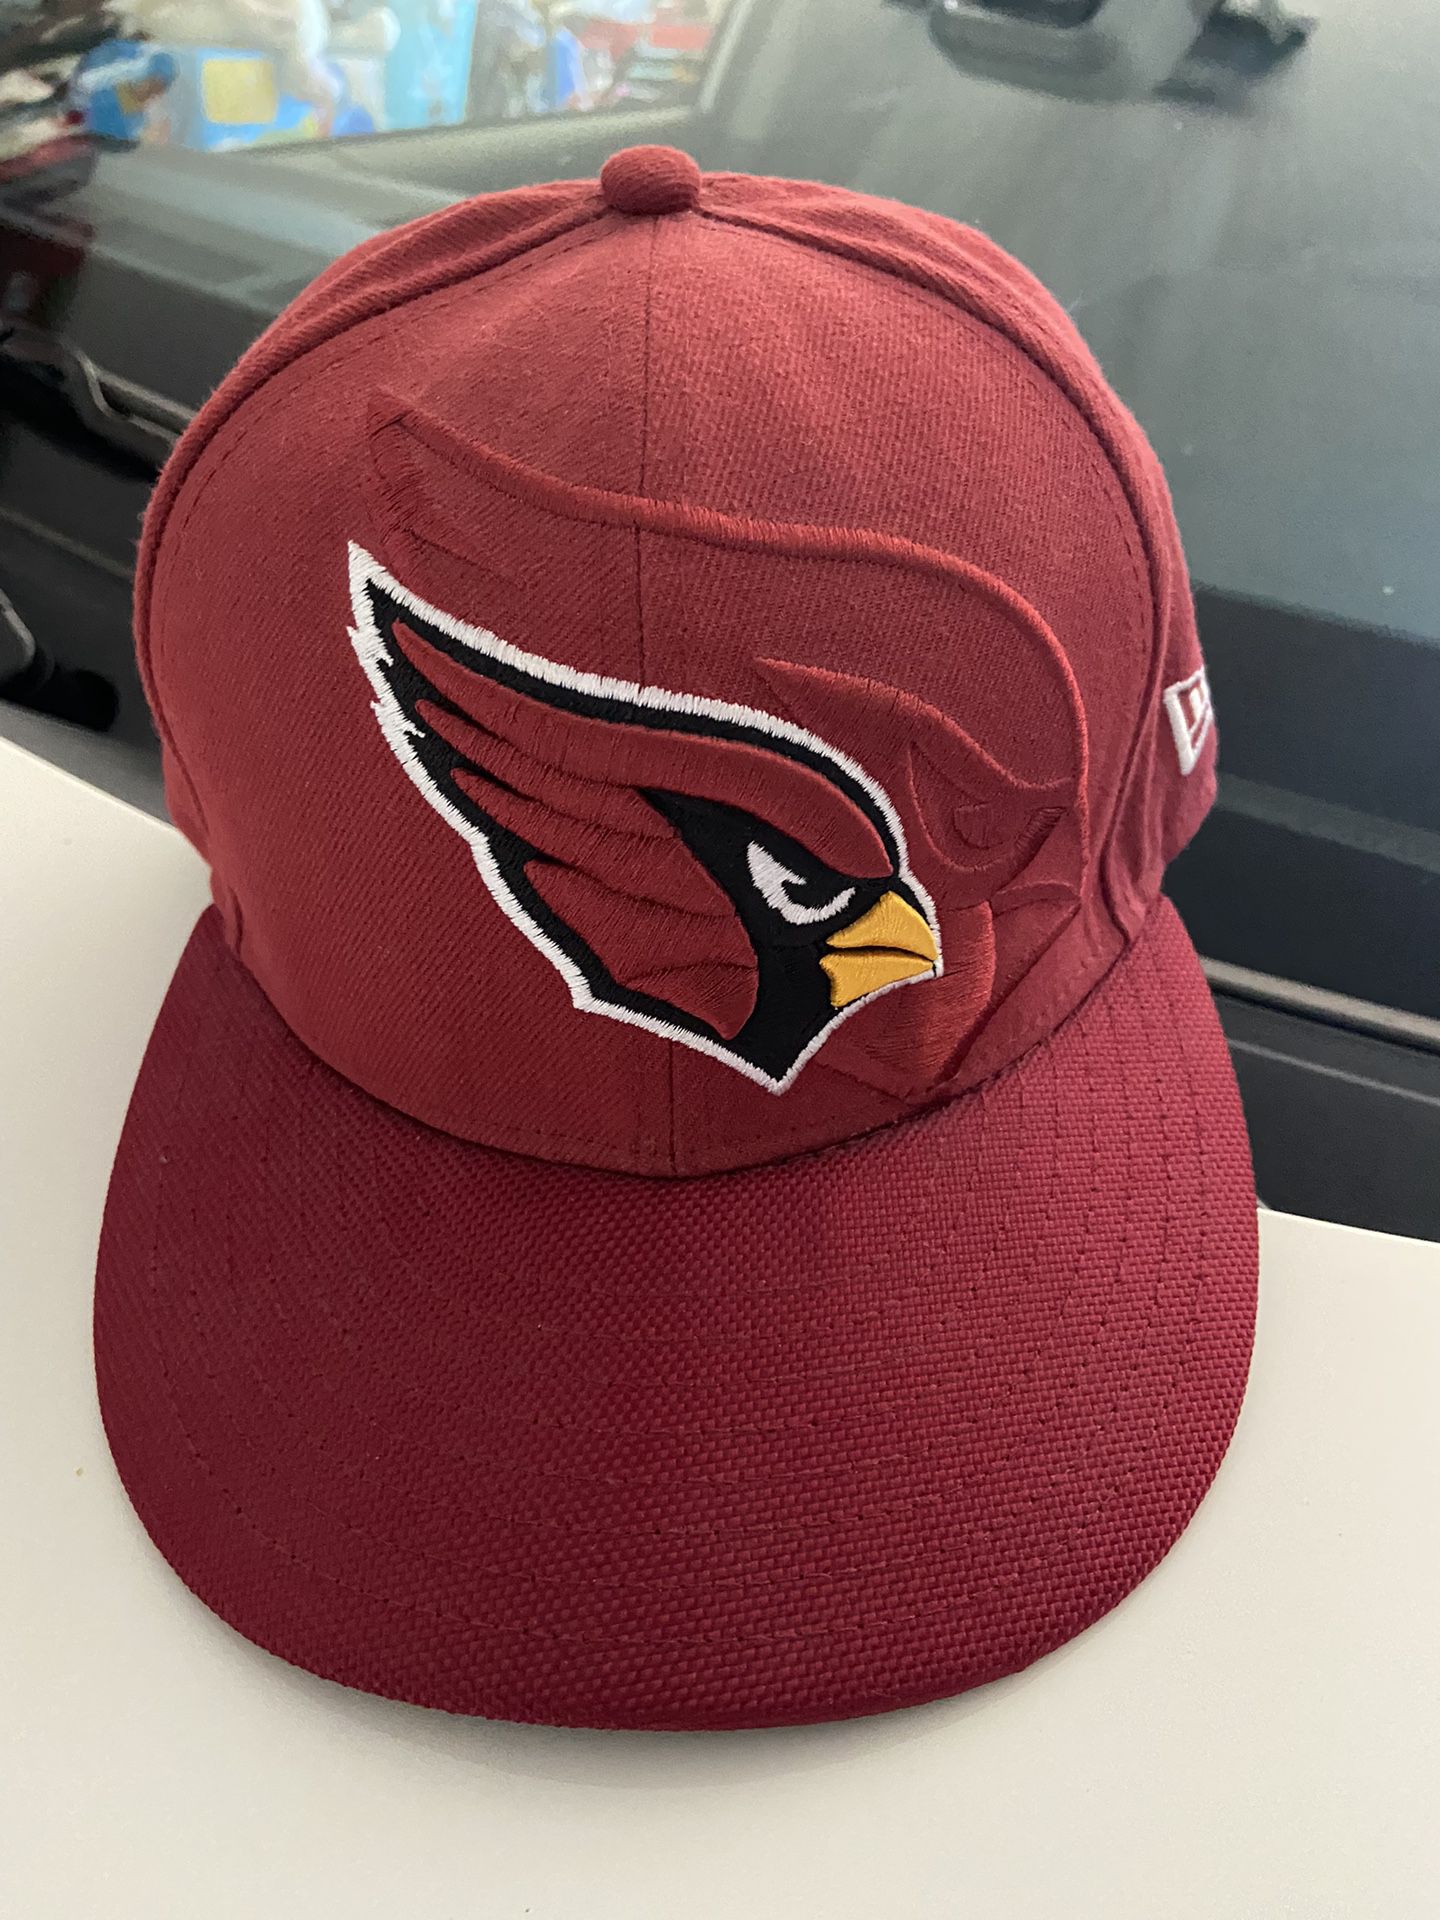 Arizona Cardinals New Era Fitted Hat, 7 1/8 for Sale in Sun City, AZ